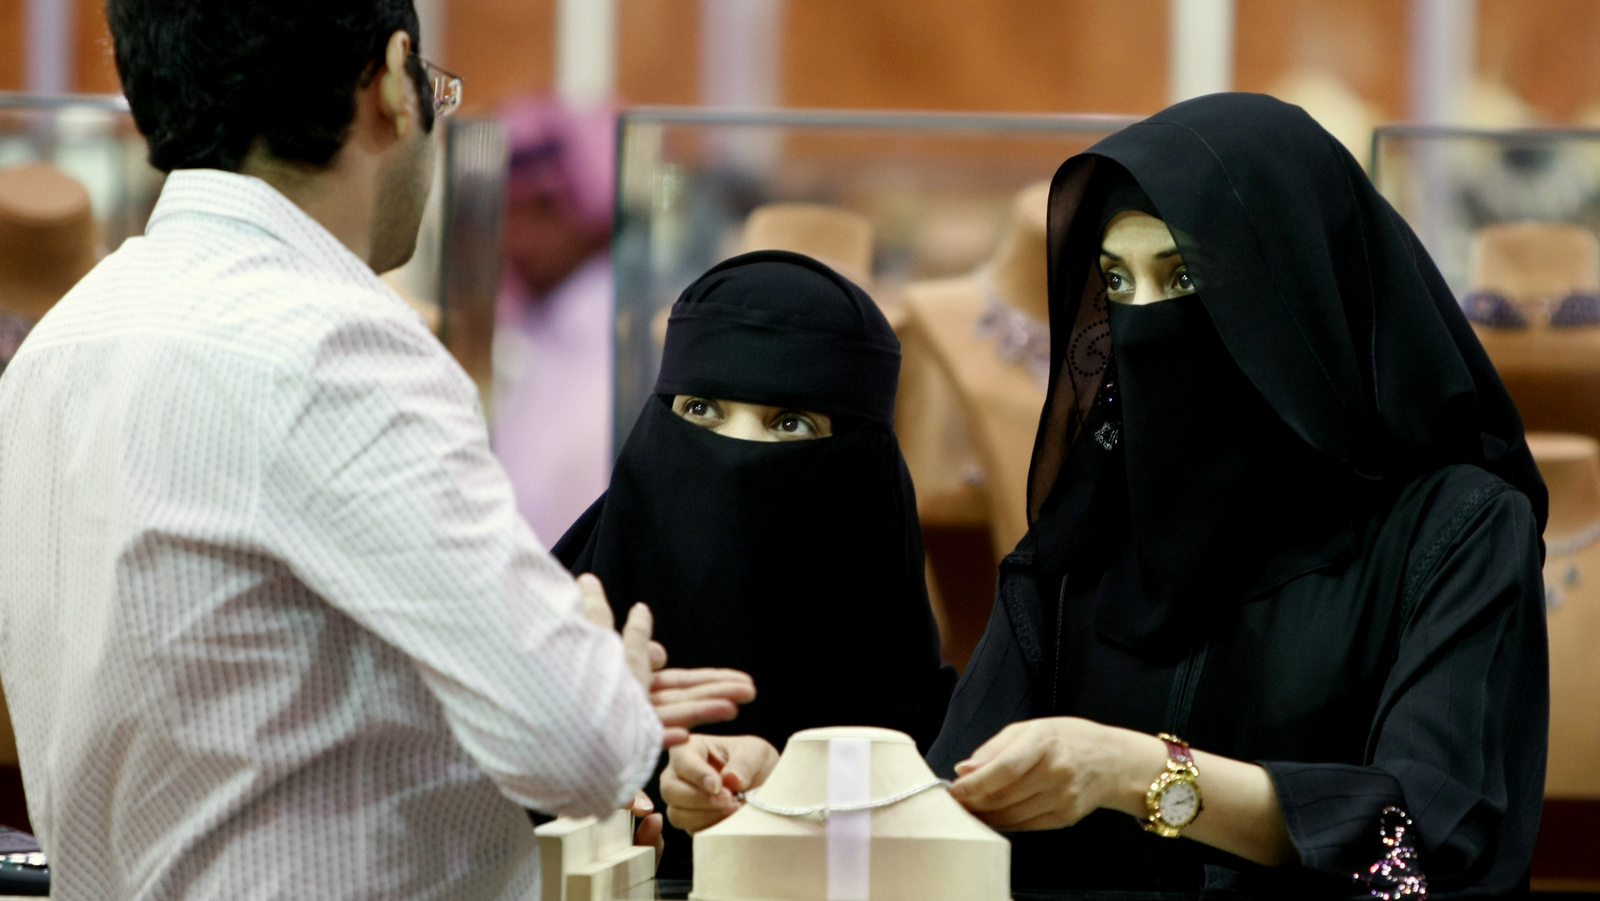 Saudi women look at jewelry at a gold fair in Riyadh, Saudi Arabia. Human rights group Amnesty International says Saudi authorities have use an iron grip to consolidate power and have unleashed a ruthless campaign of persecution against peaceful activists to silence criticism of the state. (AP Photo/Hassan Ammar)